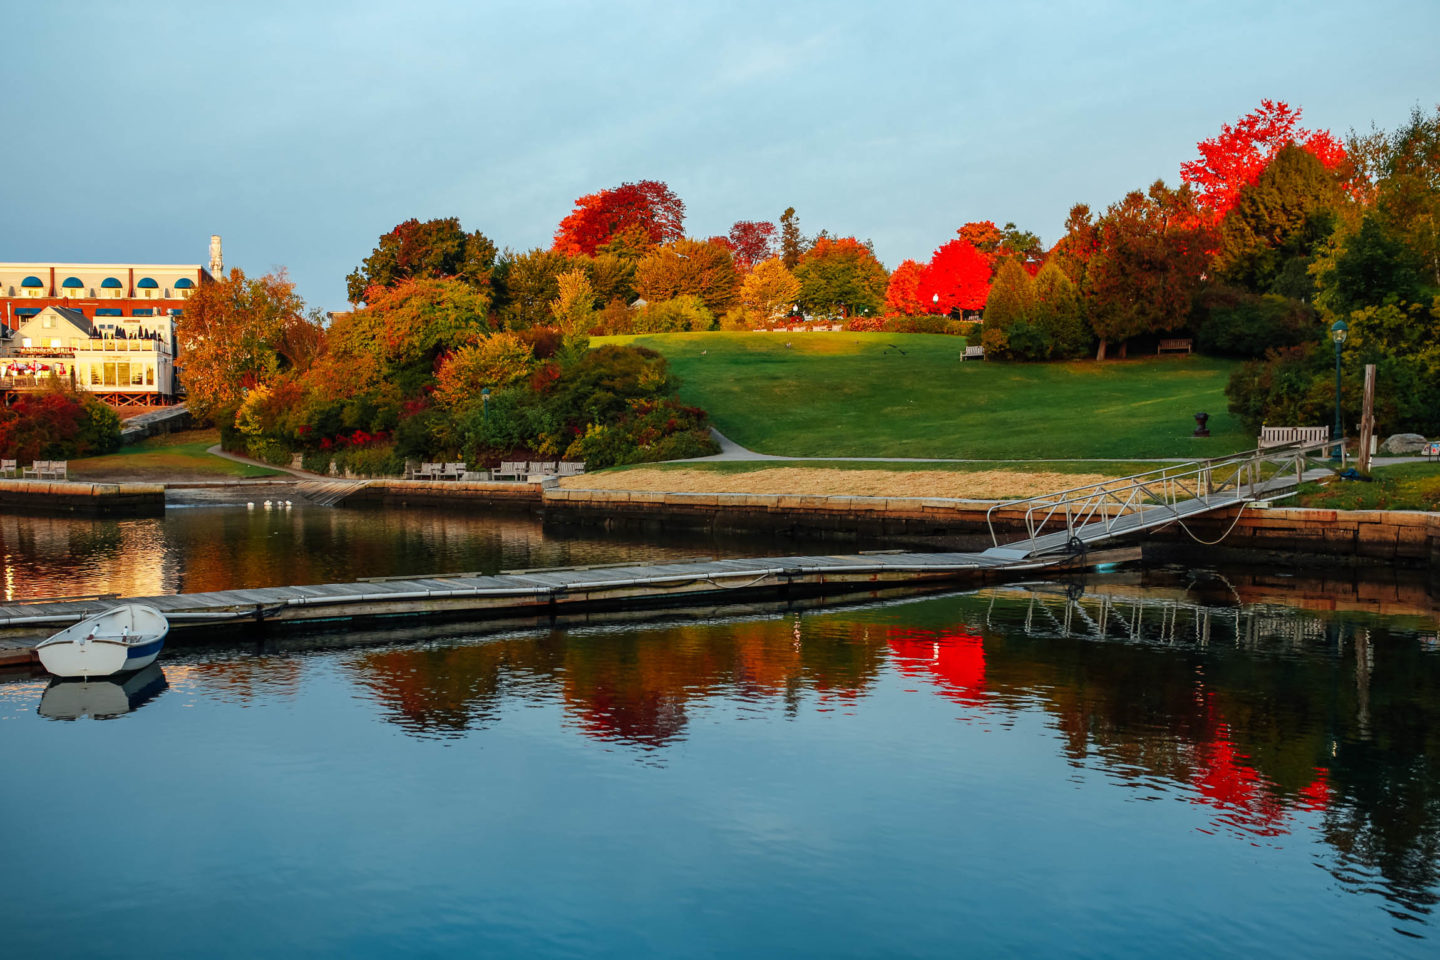 Jess Ann Kirby recommends visiting Camden, Maine for some of the best fall foliage in New England.